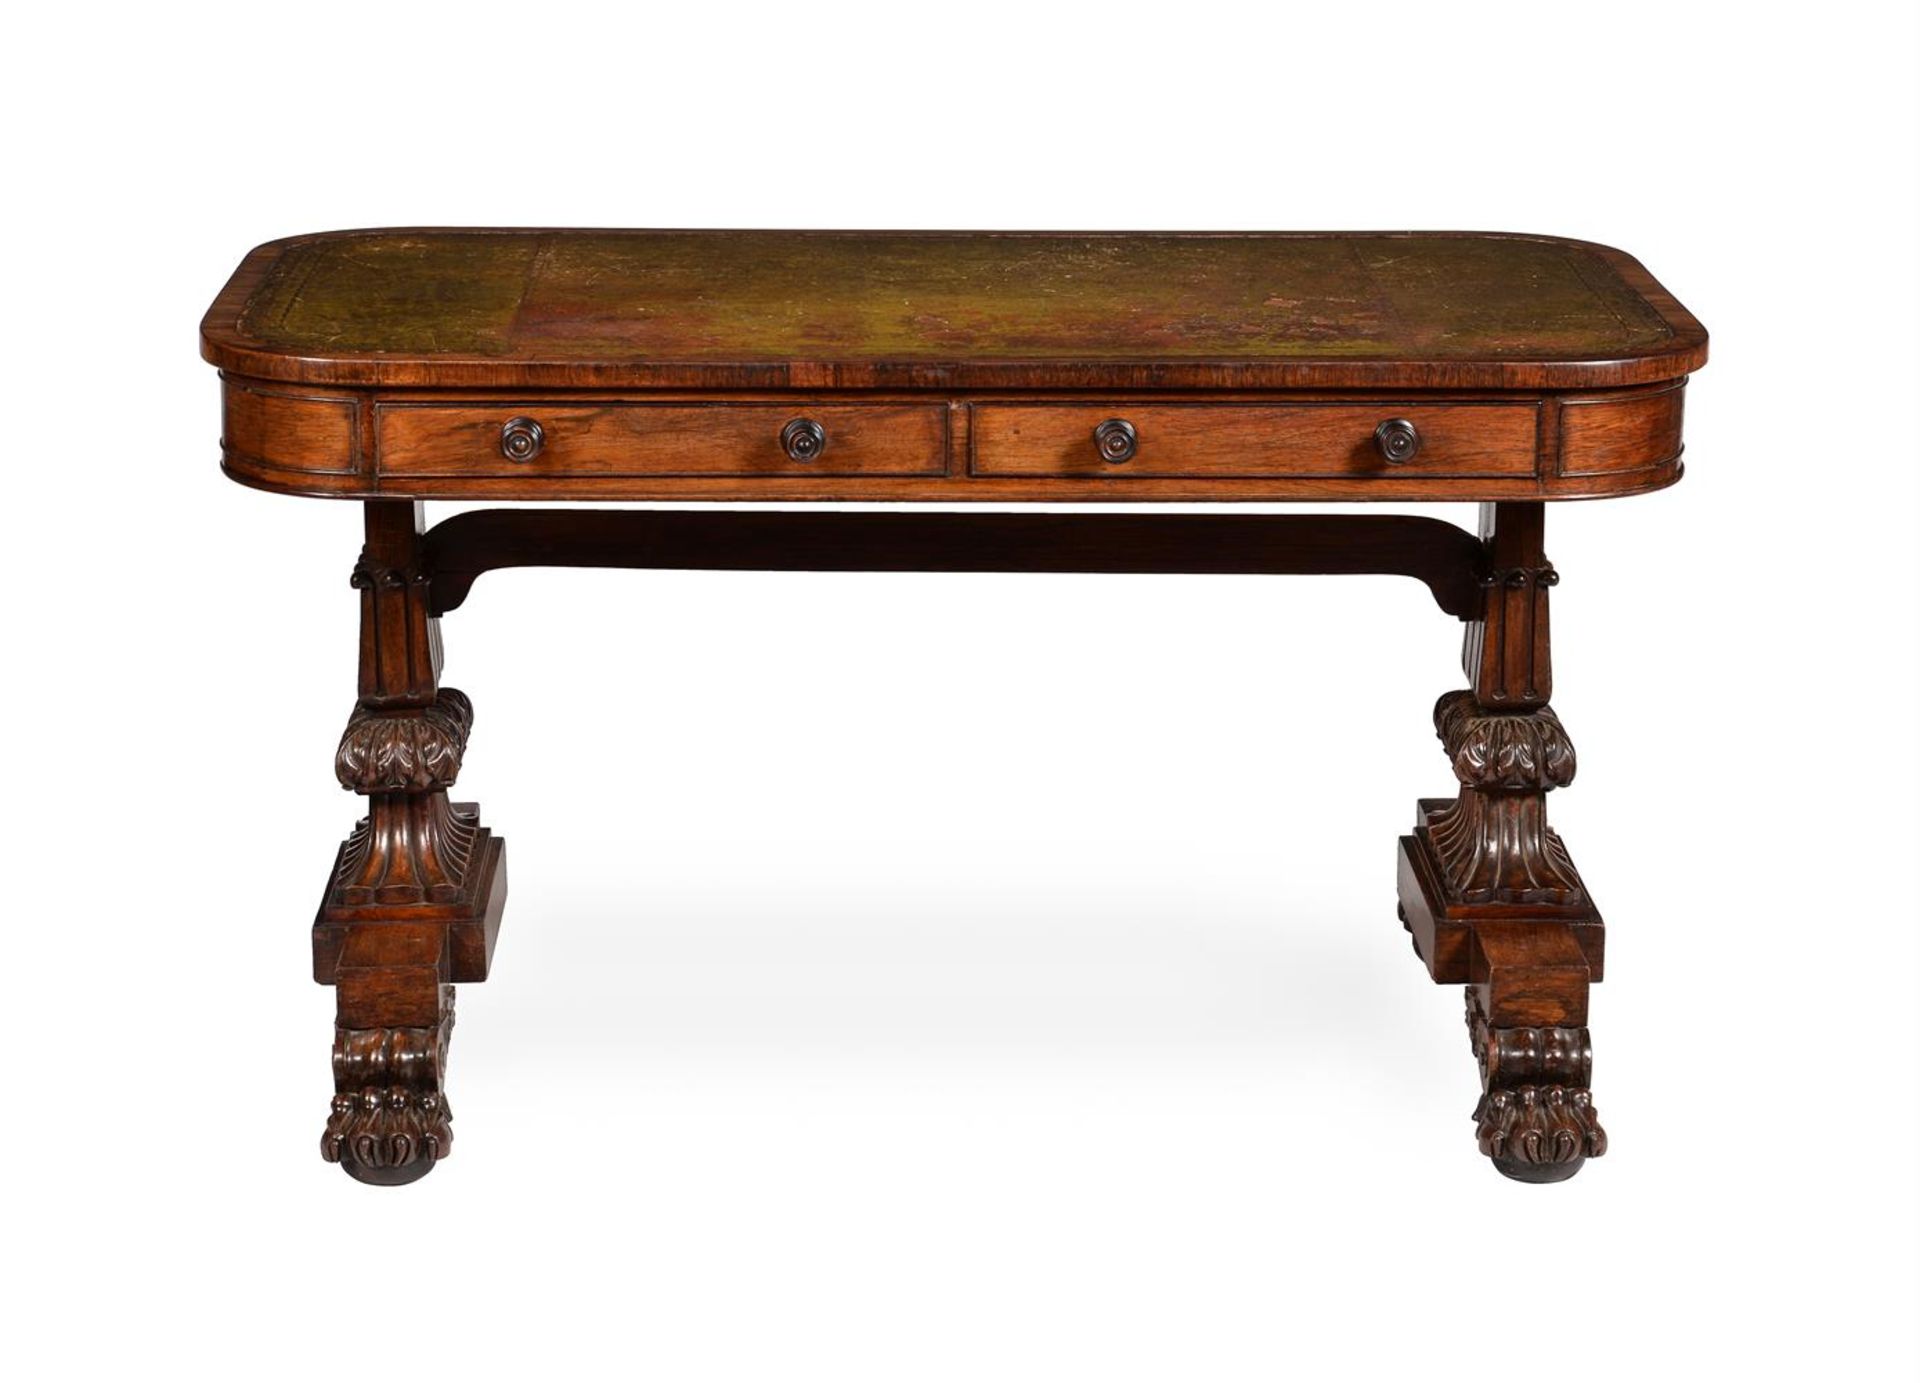 Y A GEORGE IV ROSEWOOD LIBRARY TABLE, IN THE MANNER OF MACK, WILLIAM & GIBTON, CIRCA 1825 - Image 2 of 6